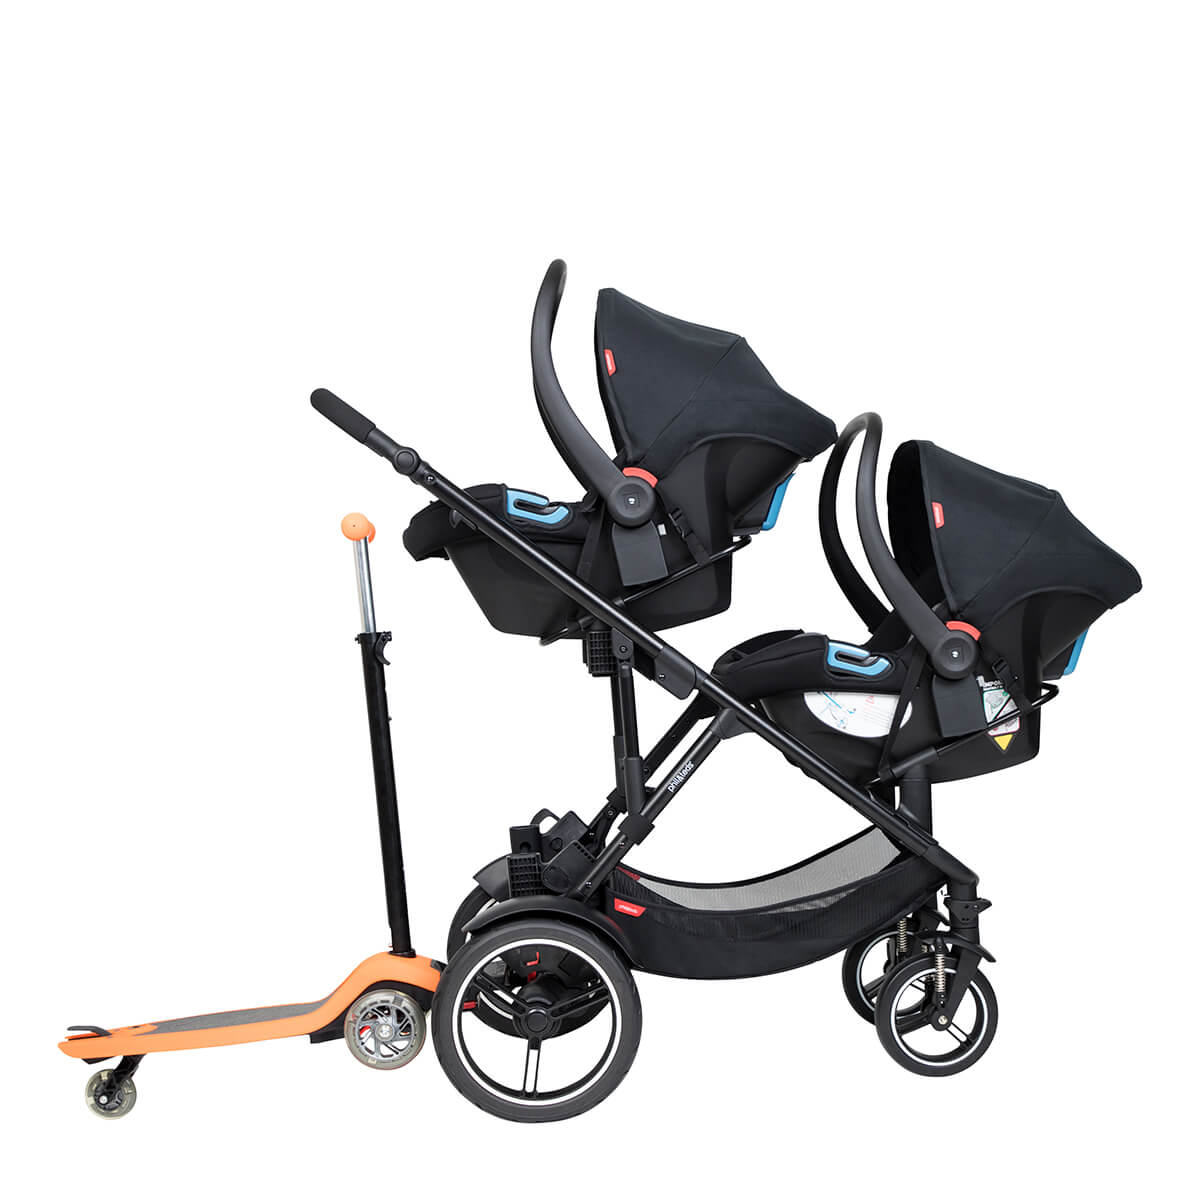 https://cdn.accentuate.io/4509528850520/19272835367000/philteds-voyager-buggy-with-double-travel-systems-and-freerider-stroller-board-in-the-rear-v1626484588681.jpg?1200x1200